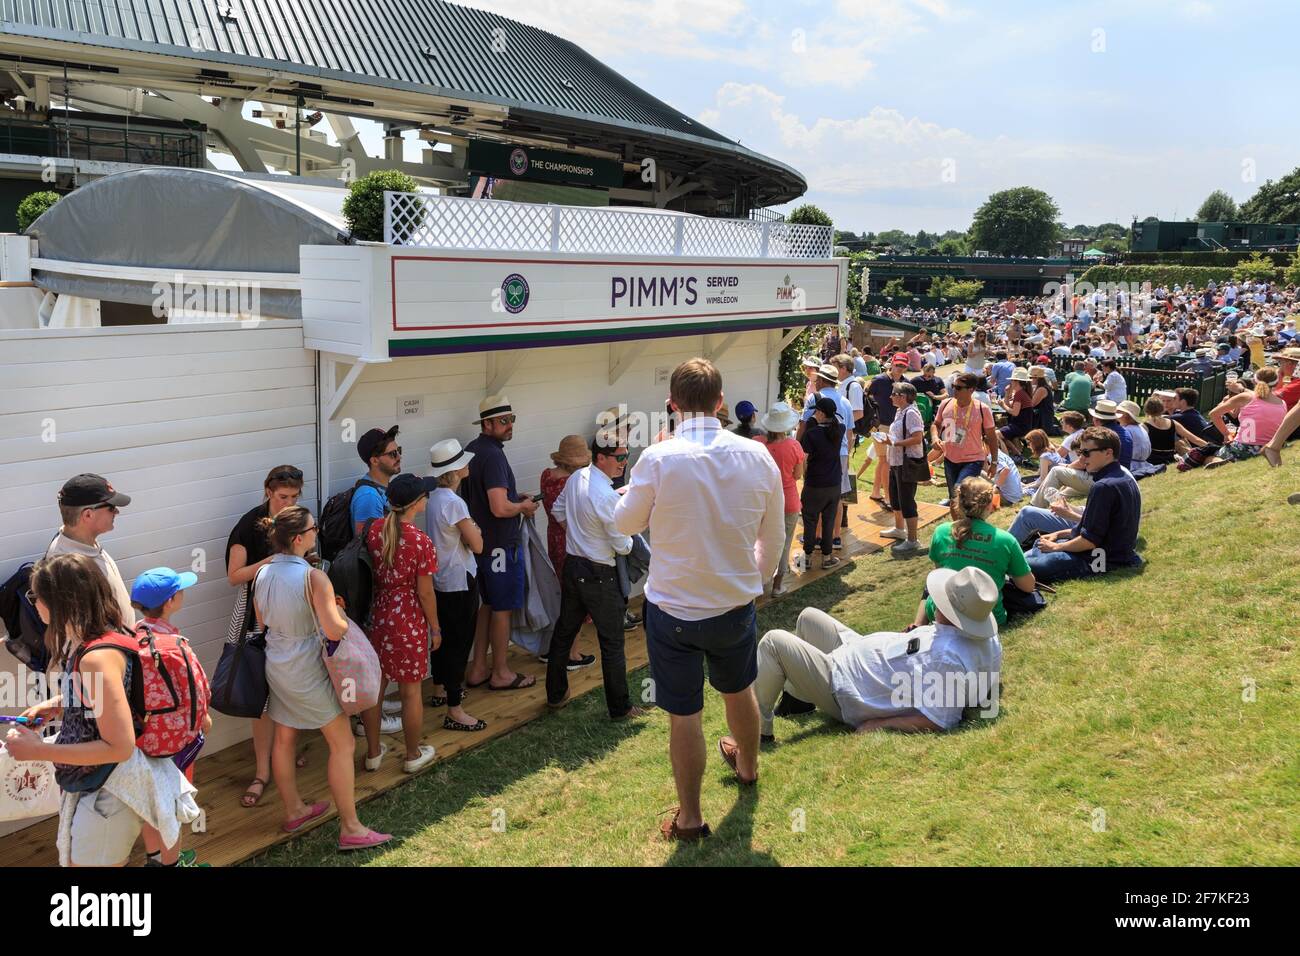 Pimm's queue, people queuing for refreshments and drinks at Wimbledon Tennis, The All England Lawn Tennis Club, London, UK Stock Photo